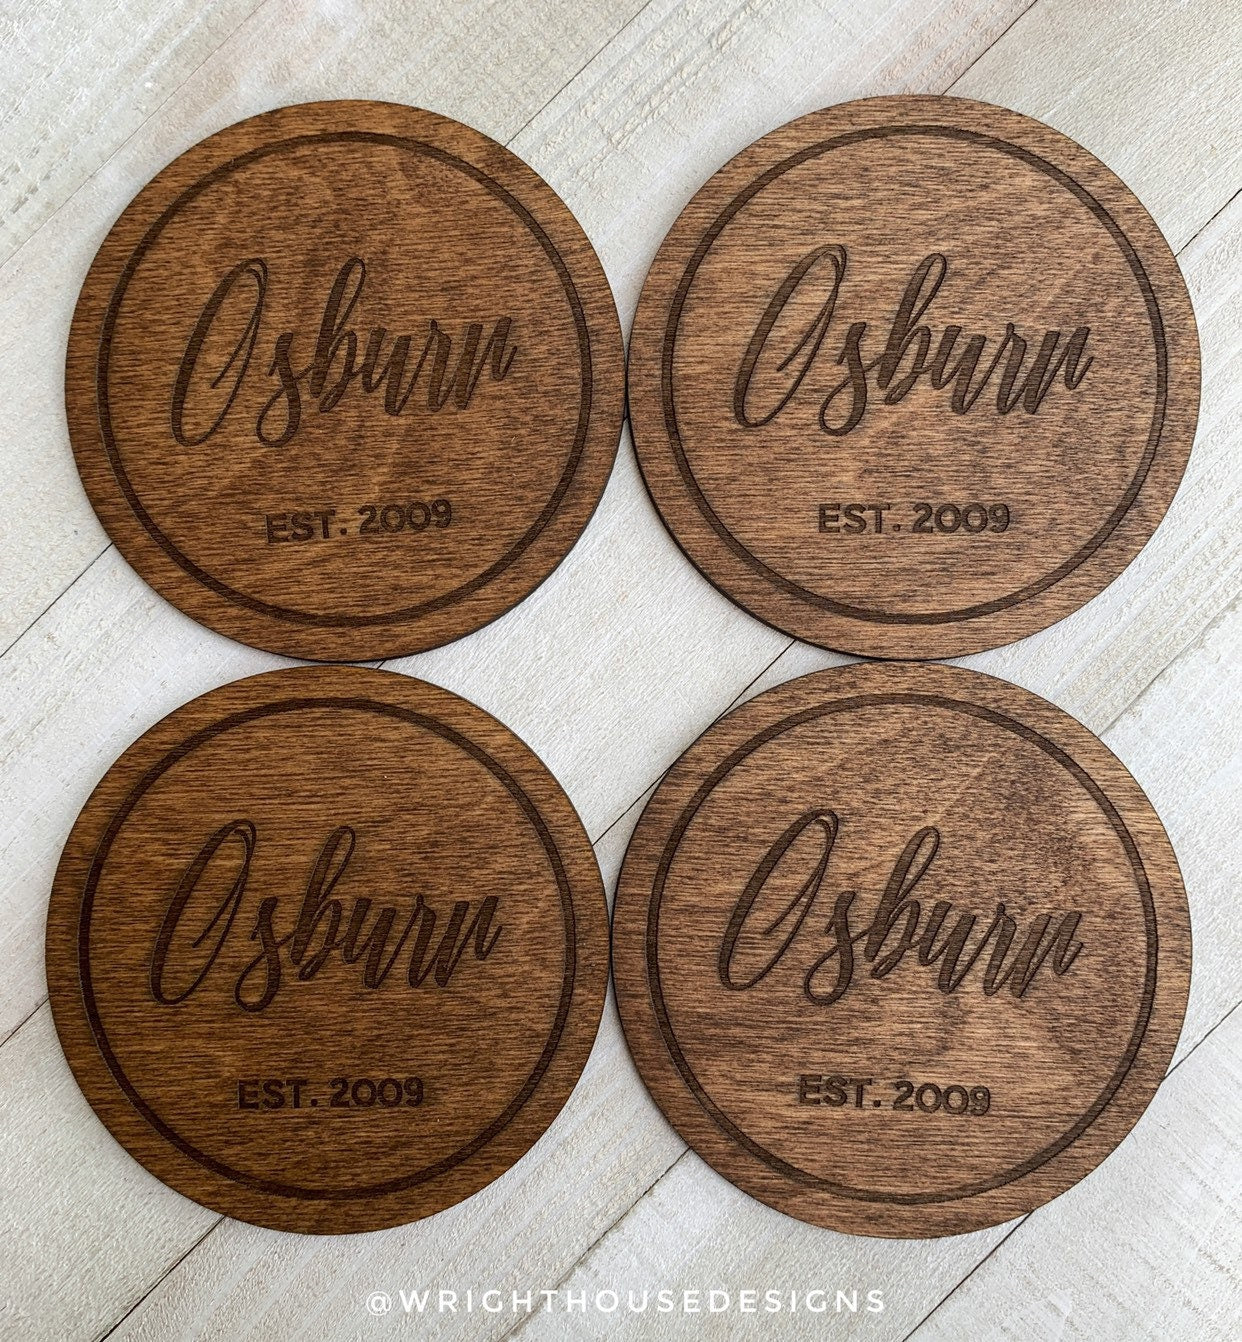 Personalized Name - Established Date - Engraved Coaster - Wooden Coffee Table Accessories Wooden Drink Coaster Set - Coffee Enthusiast Gift